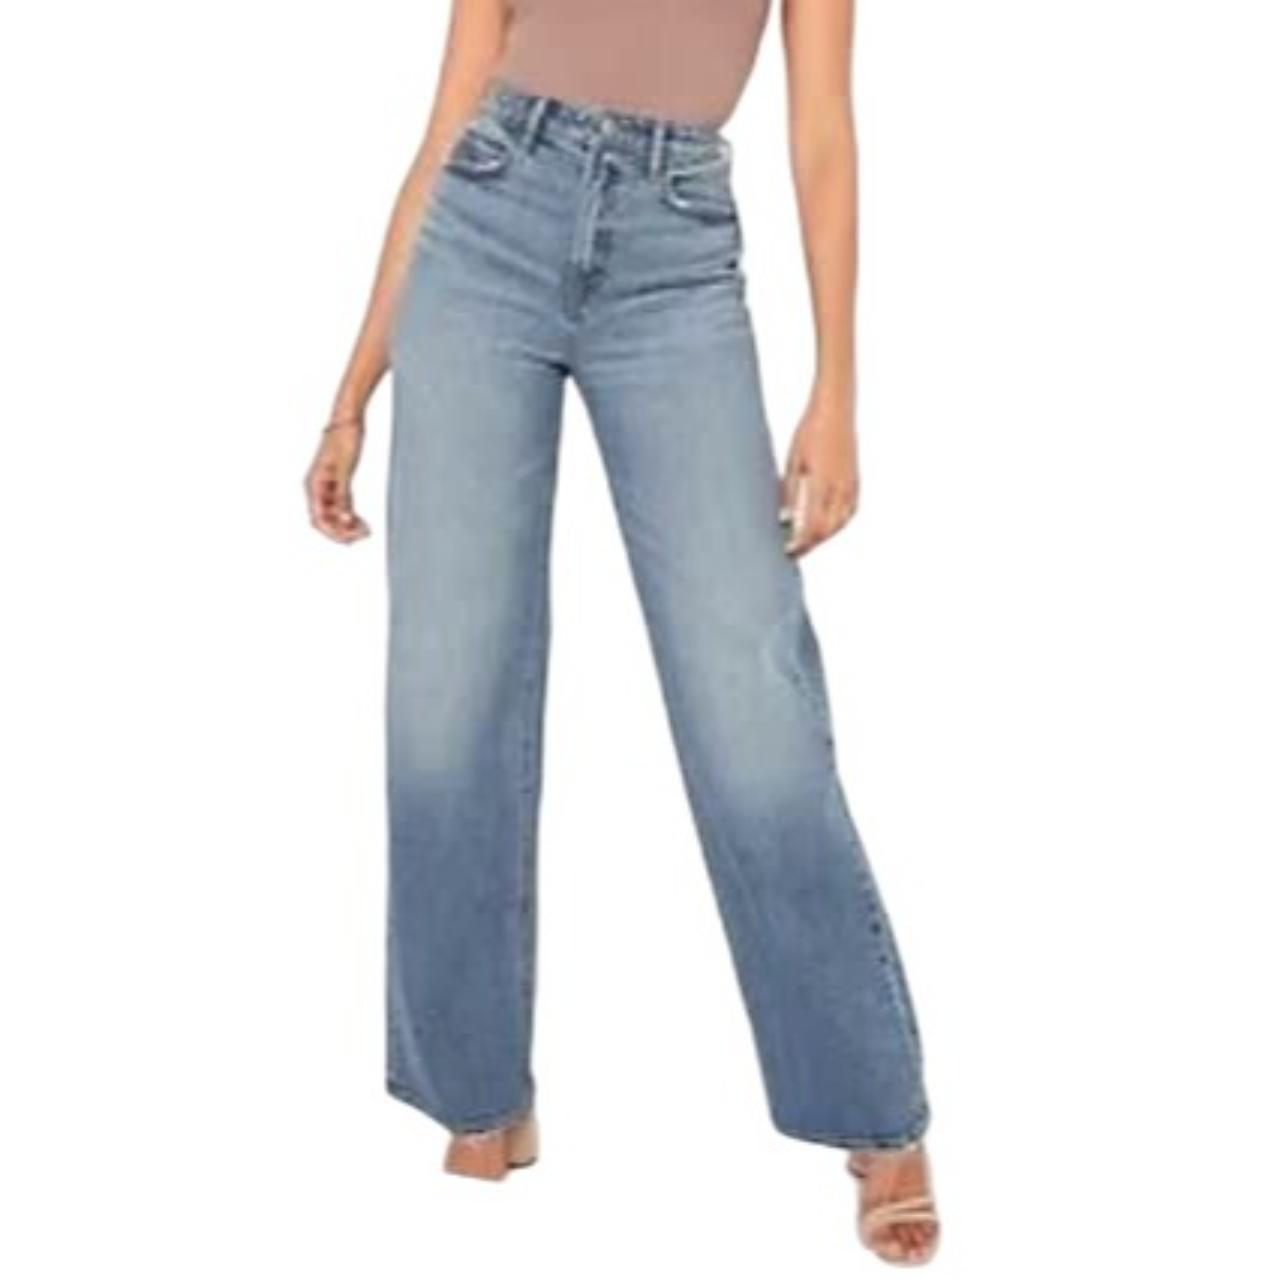 Extra High-Waisted Wide-Leg Jeans for Women old navy... - Depop